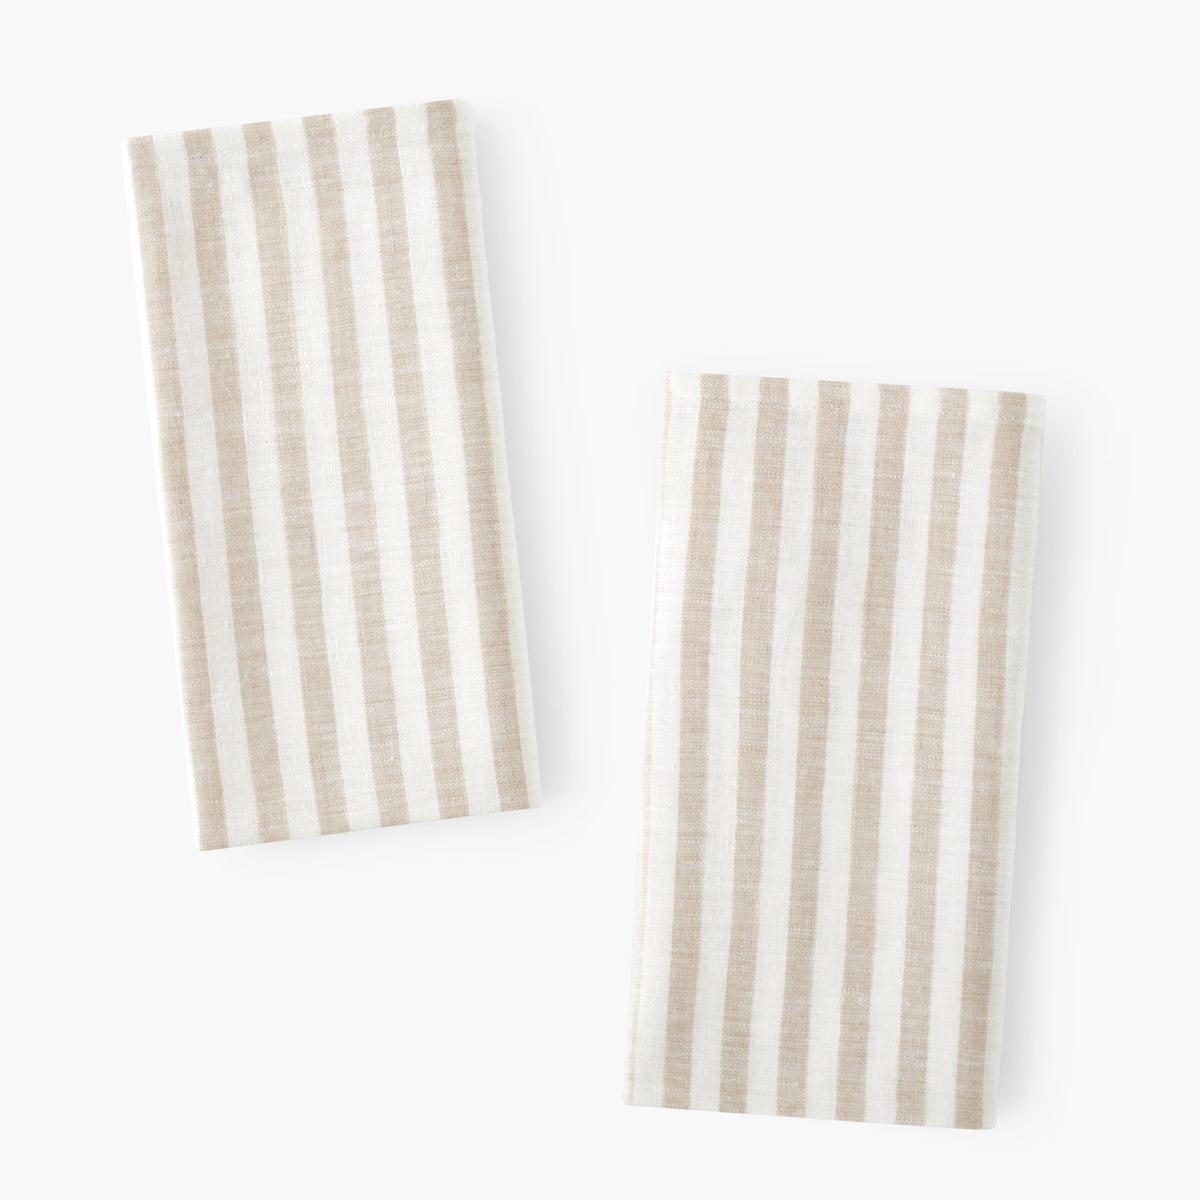 Under The Canopy Luxe Organic Cotton Towel - Taupe, Taupe / Wash Cloth Wash Cloth Taupe